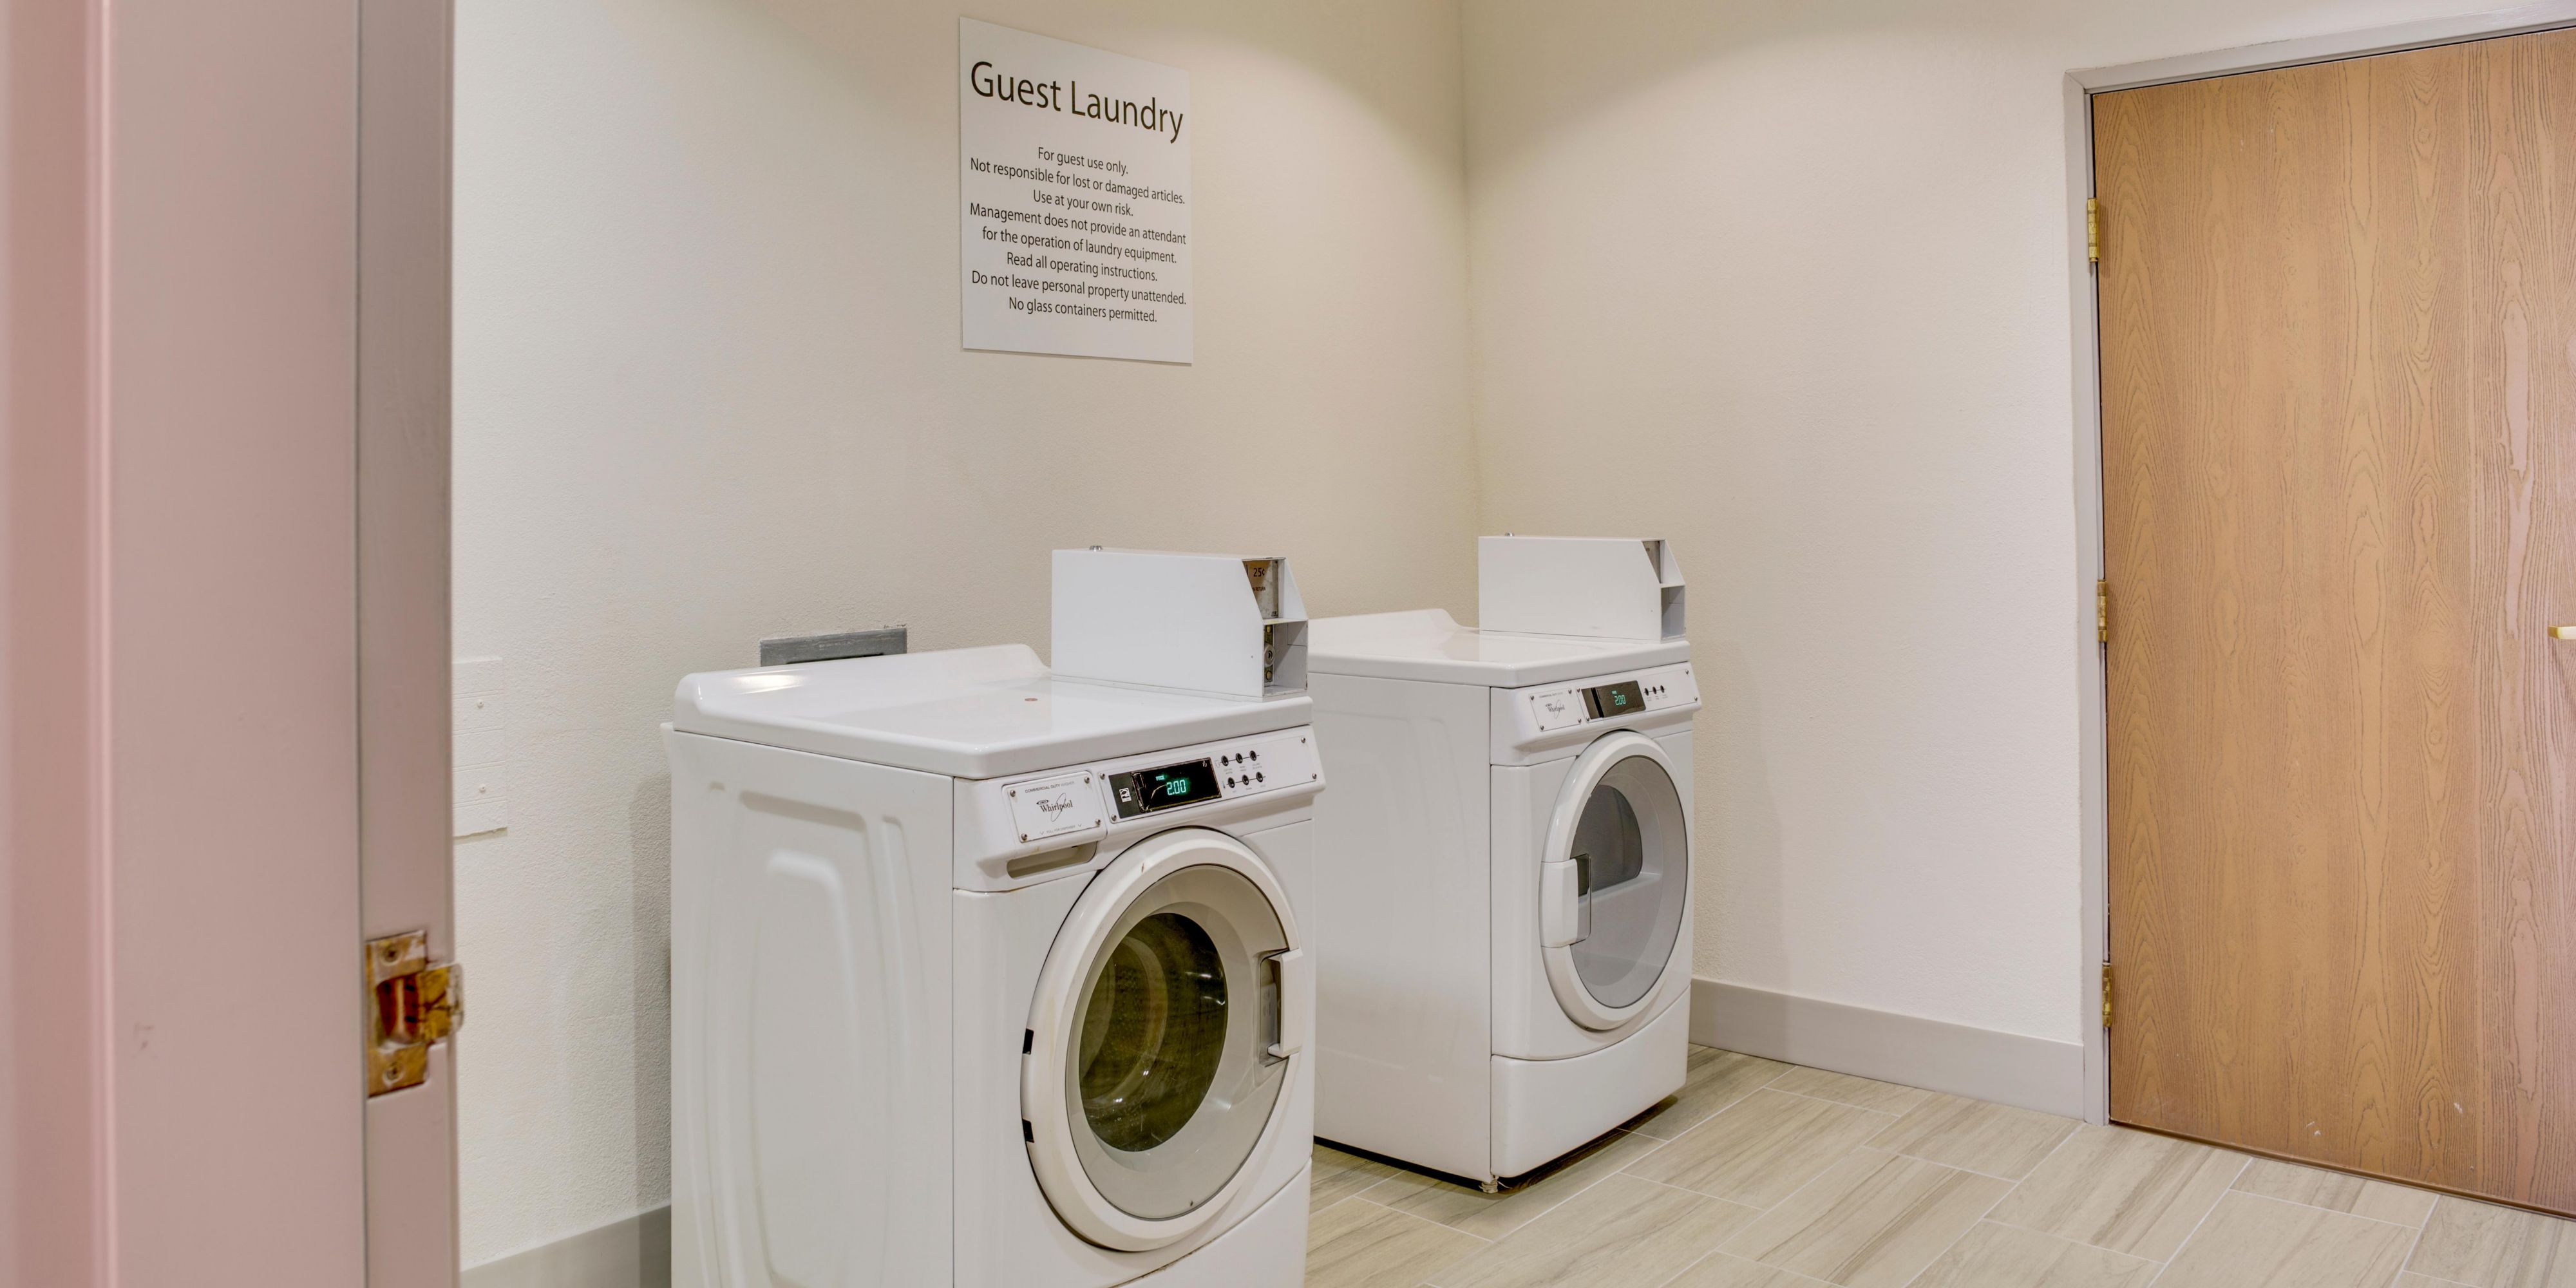 Simplify your travel plans at our hotel in Emporia, KS. Start your day in style with free toiletries and clothes fresh from our laundry facility.